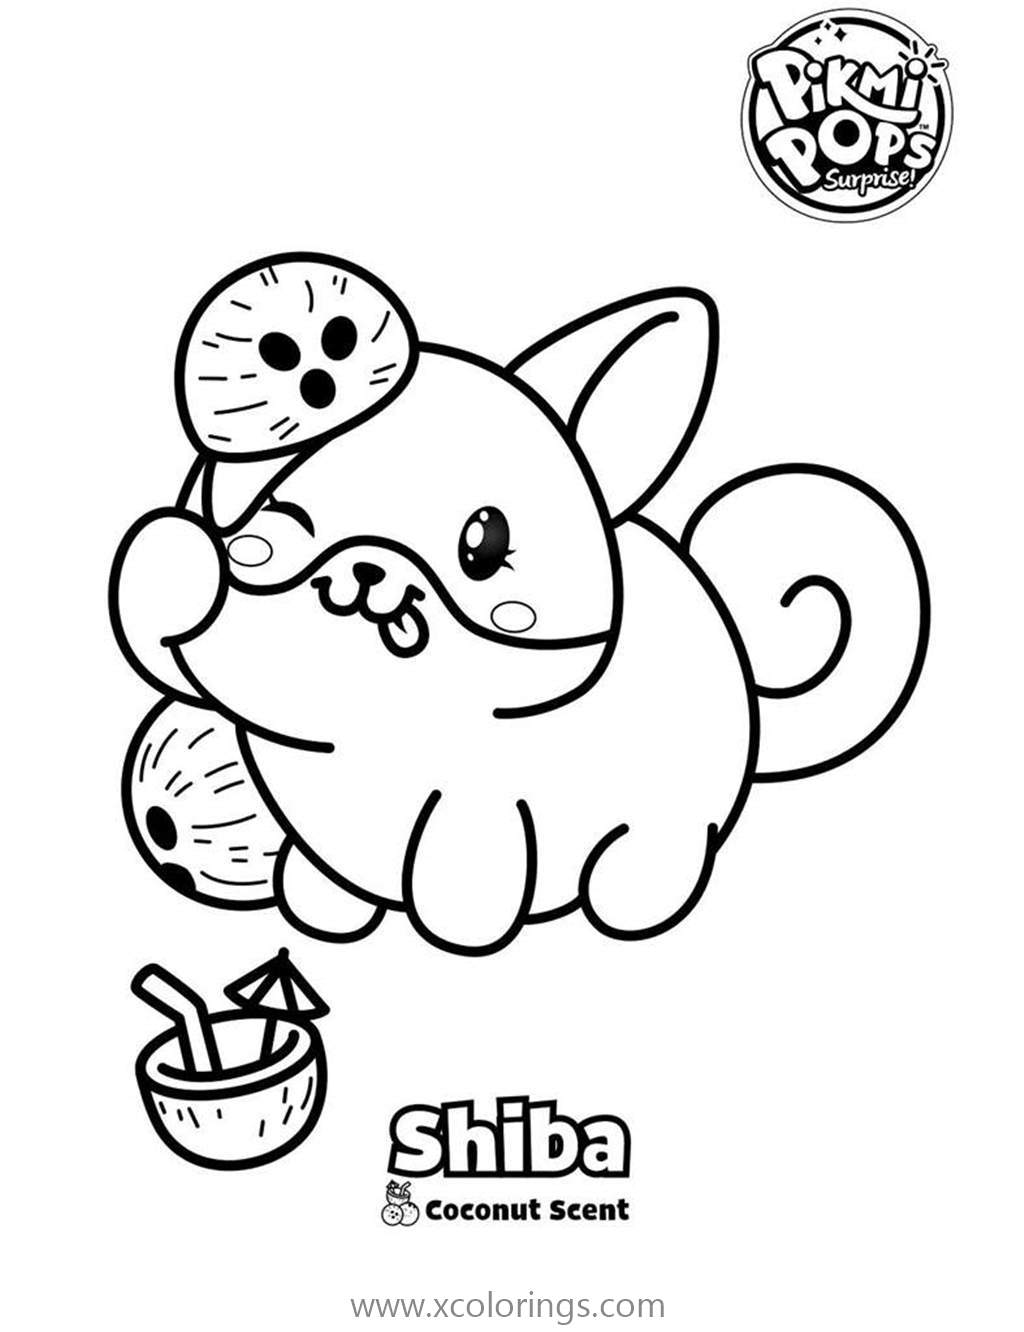 Free Shiba from Pikmi Pops Coloring Pages printable